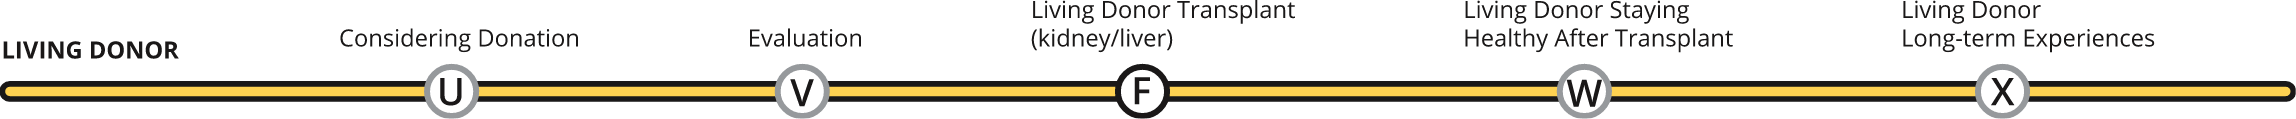 Donor Line